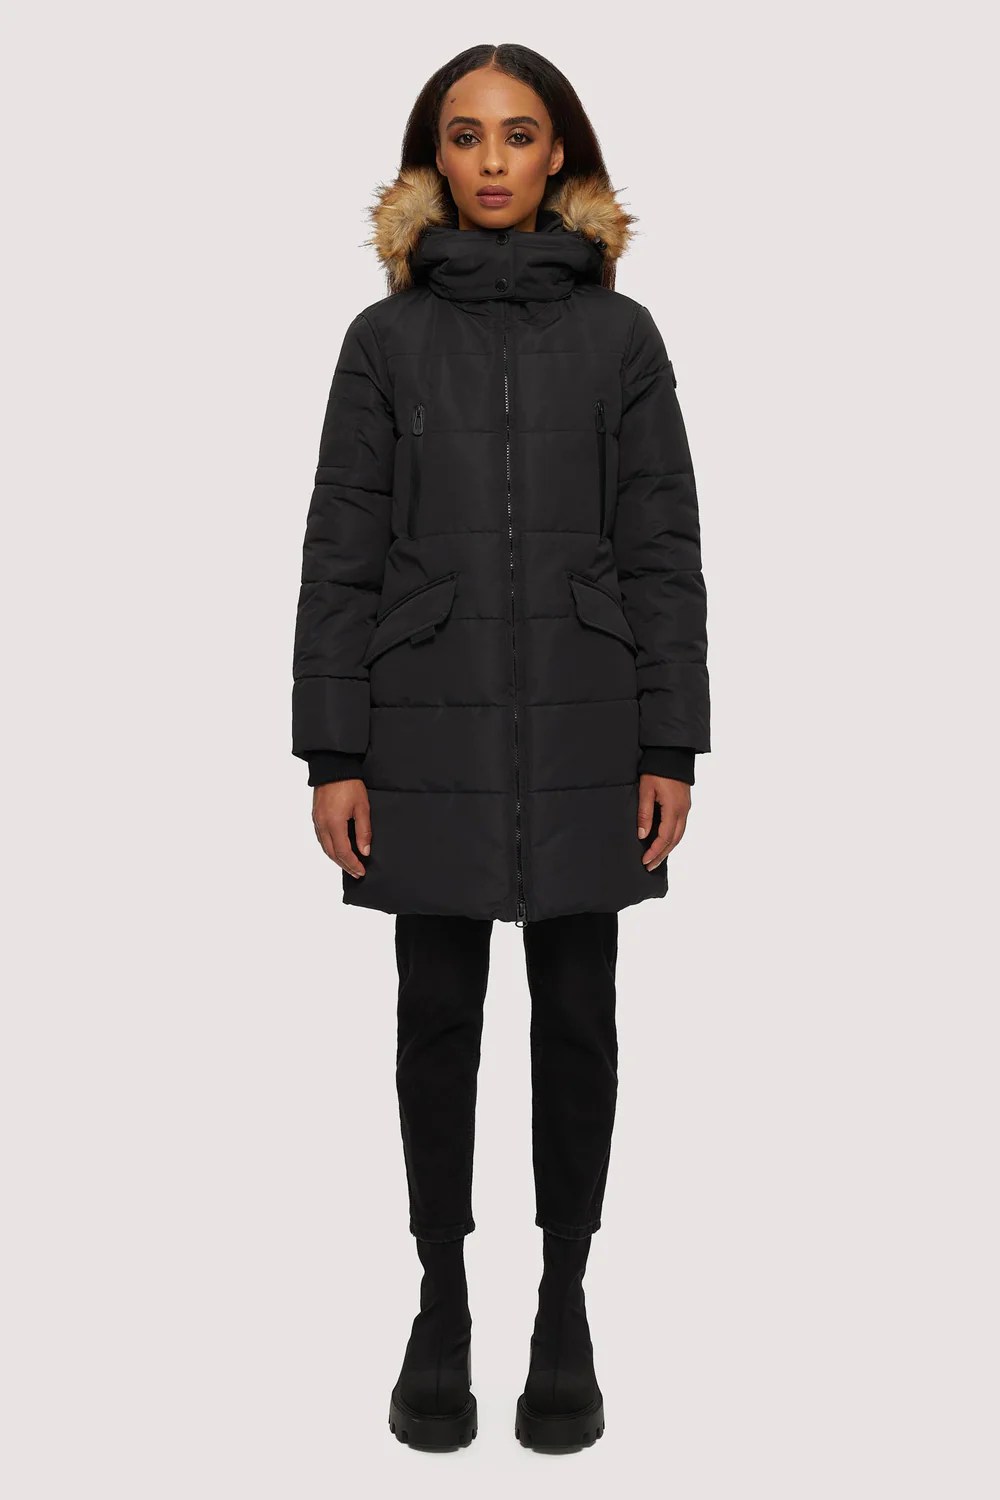 Noize Addie Parka Winter Coat for Extreme Cold